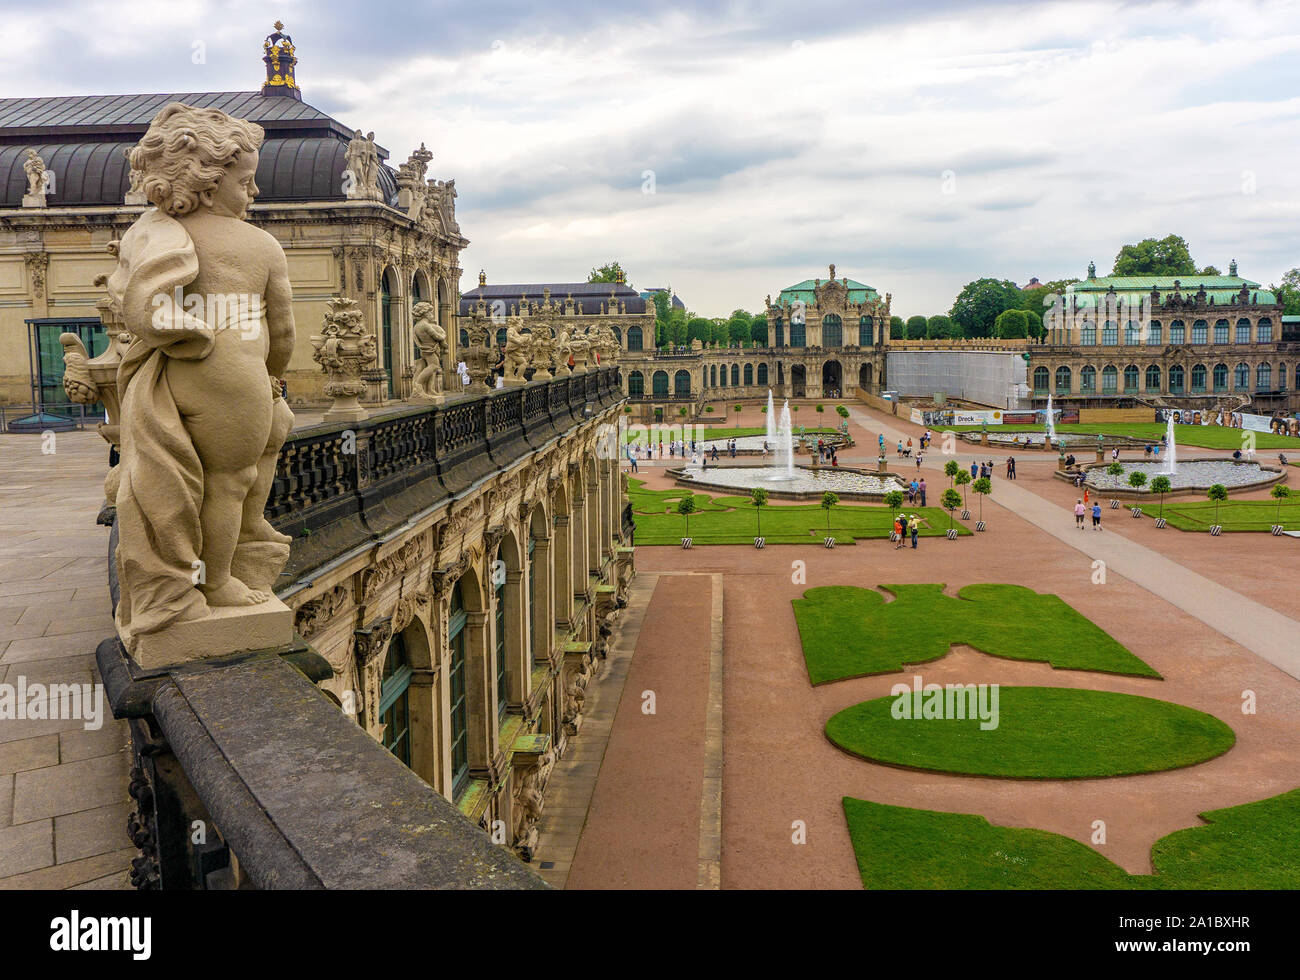 DRESDEN, GERMANY - May 21, 2018:  Tourist crowd at Zwinger Dresden. The Dresden Zwinger is a Historic Palace and Tourist attraction in Dresden. Stock Photo